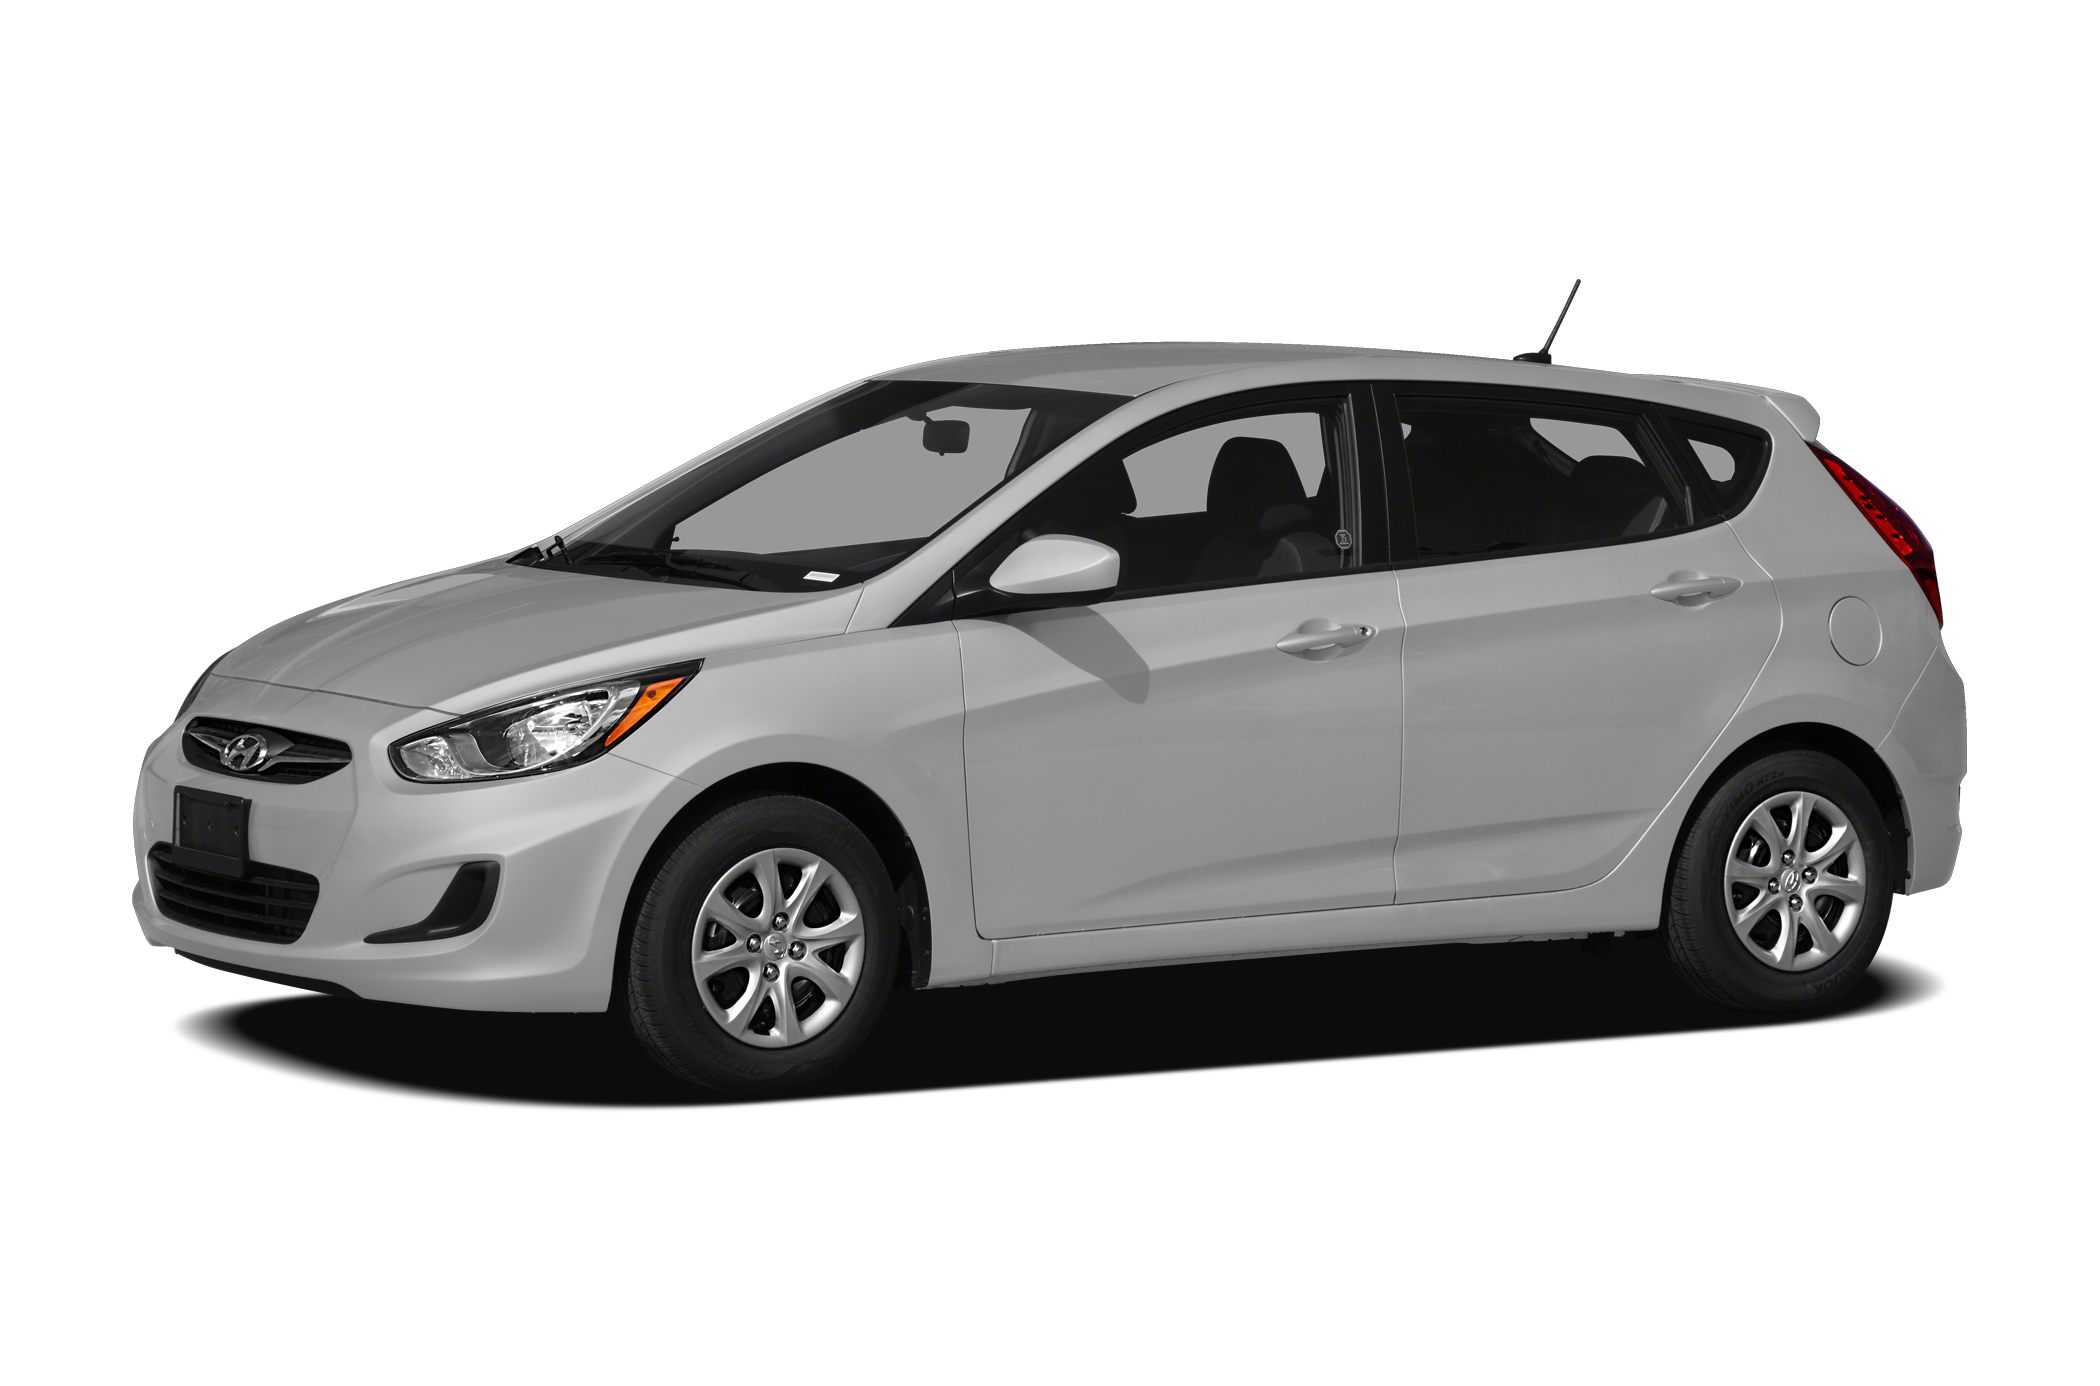 2012 Hyundai Accent oem parts and accessories on sale